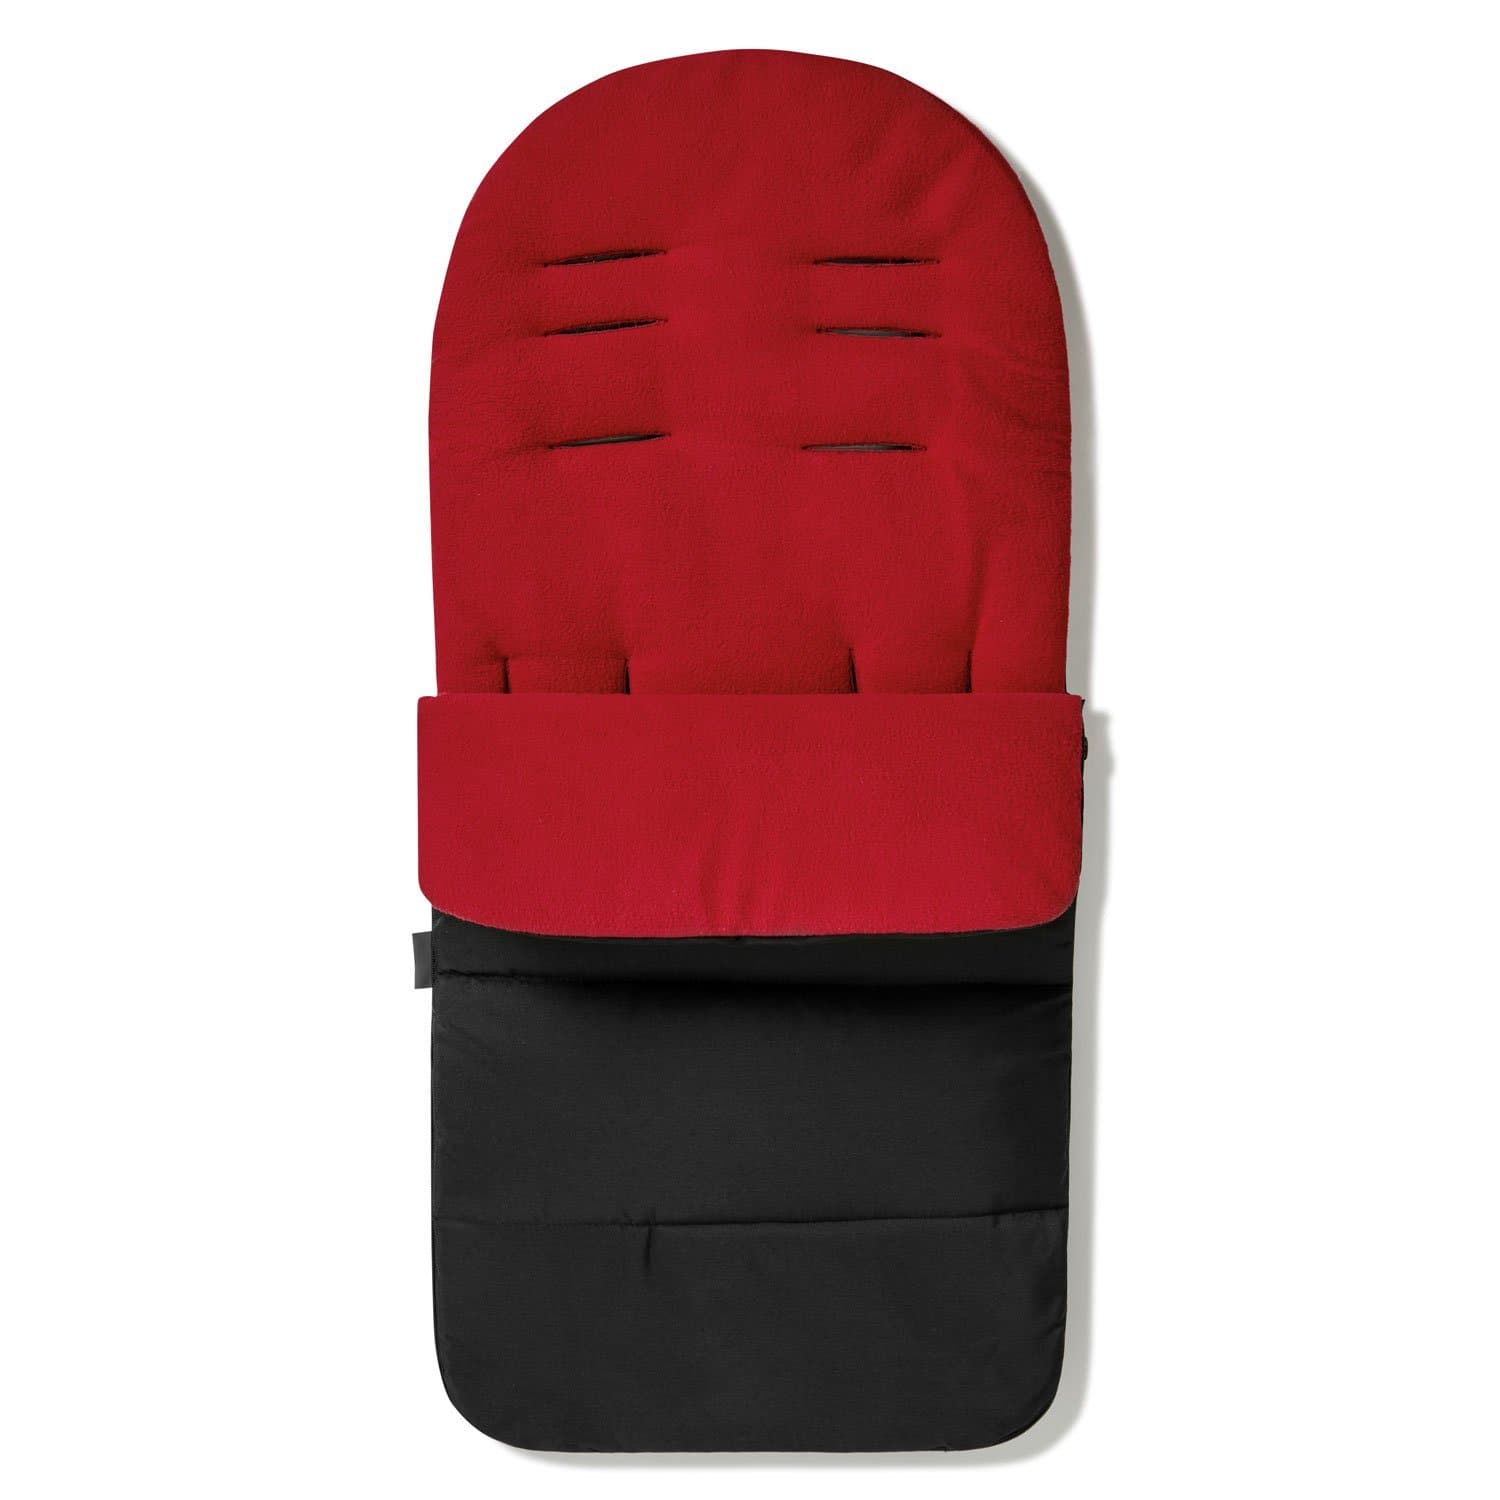 Premium Footmuff / Cosy Toes Compatible with Uppababy - Fire Red / Fits All Models | For Your Little One